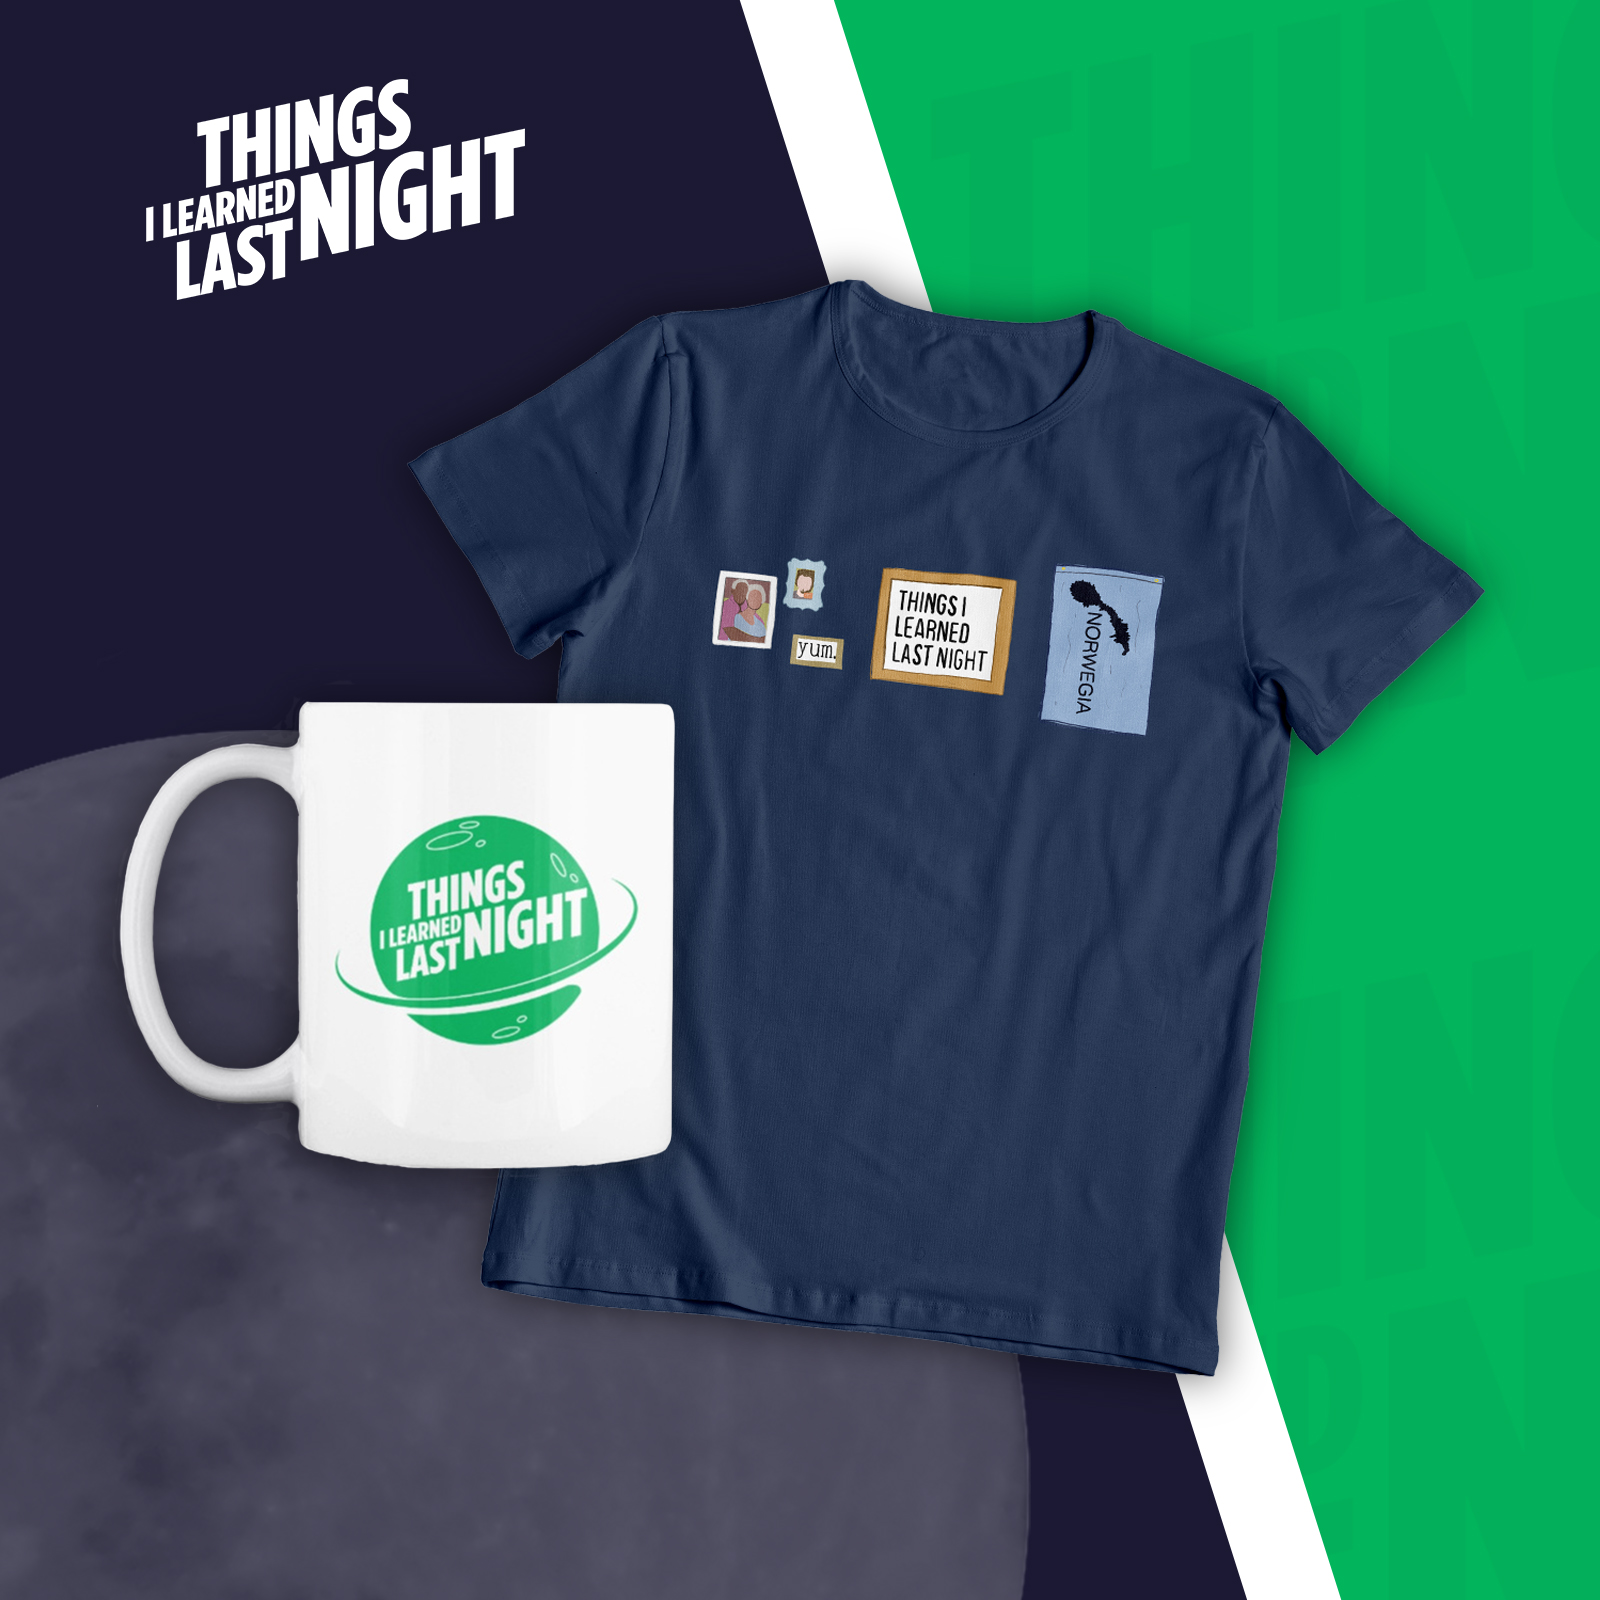 Coffee Mug and Tee Shirt from Educational Comedy Podcast Things I Learned Last Night